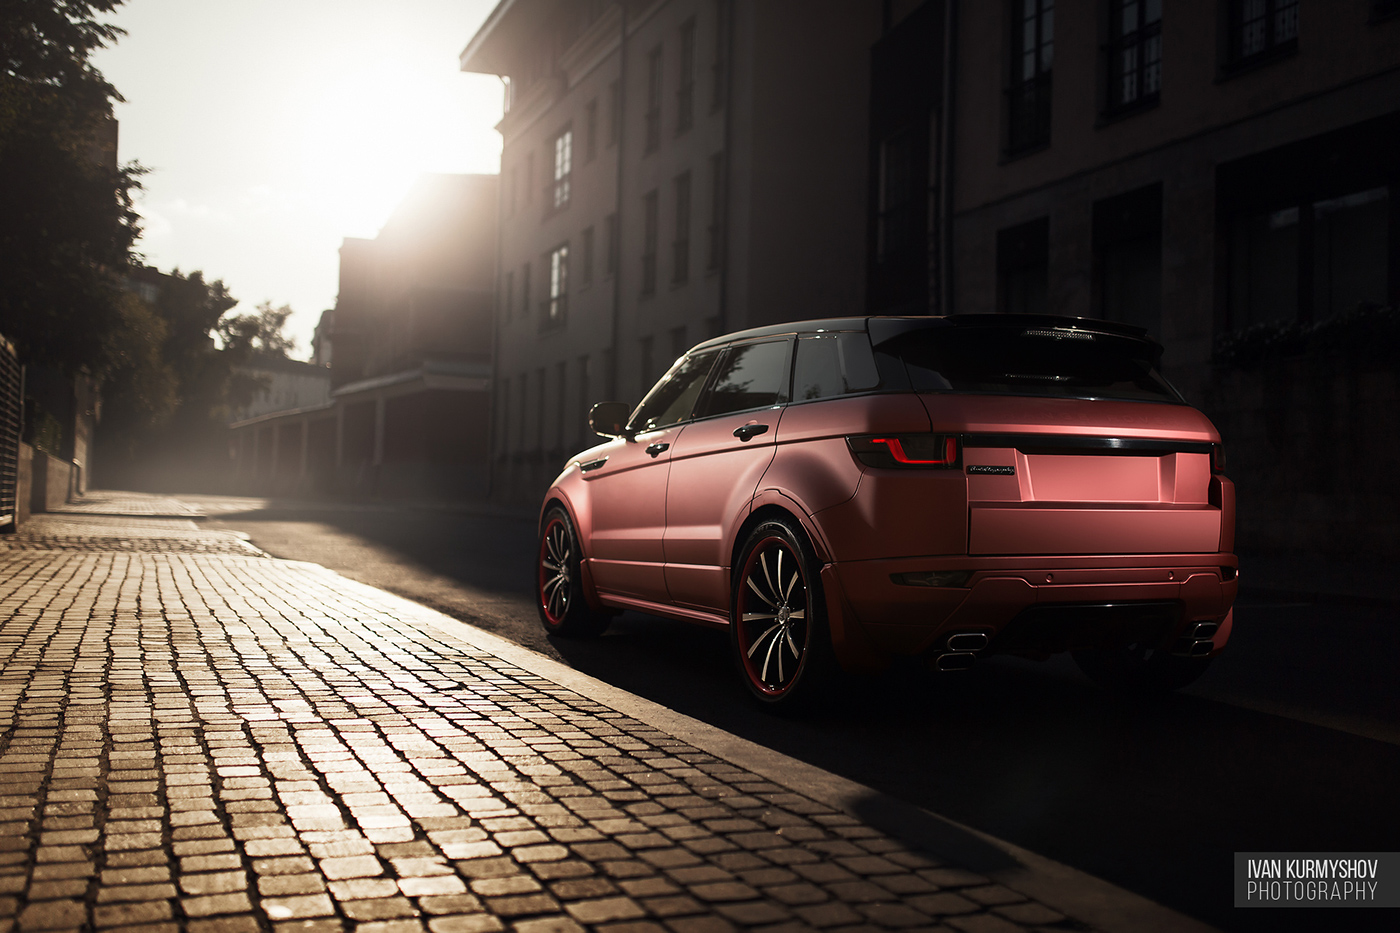 Land Rover range rover Evoque Moscow car automotive   photo Russia sunset Photography 